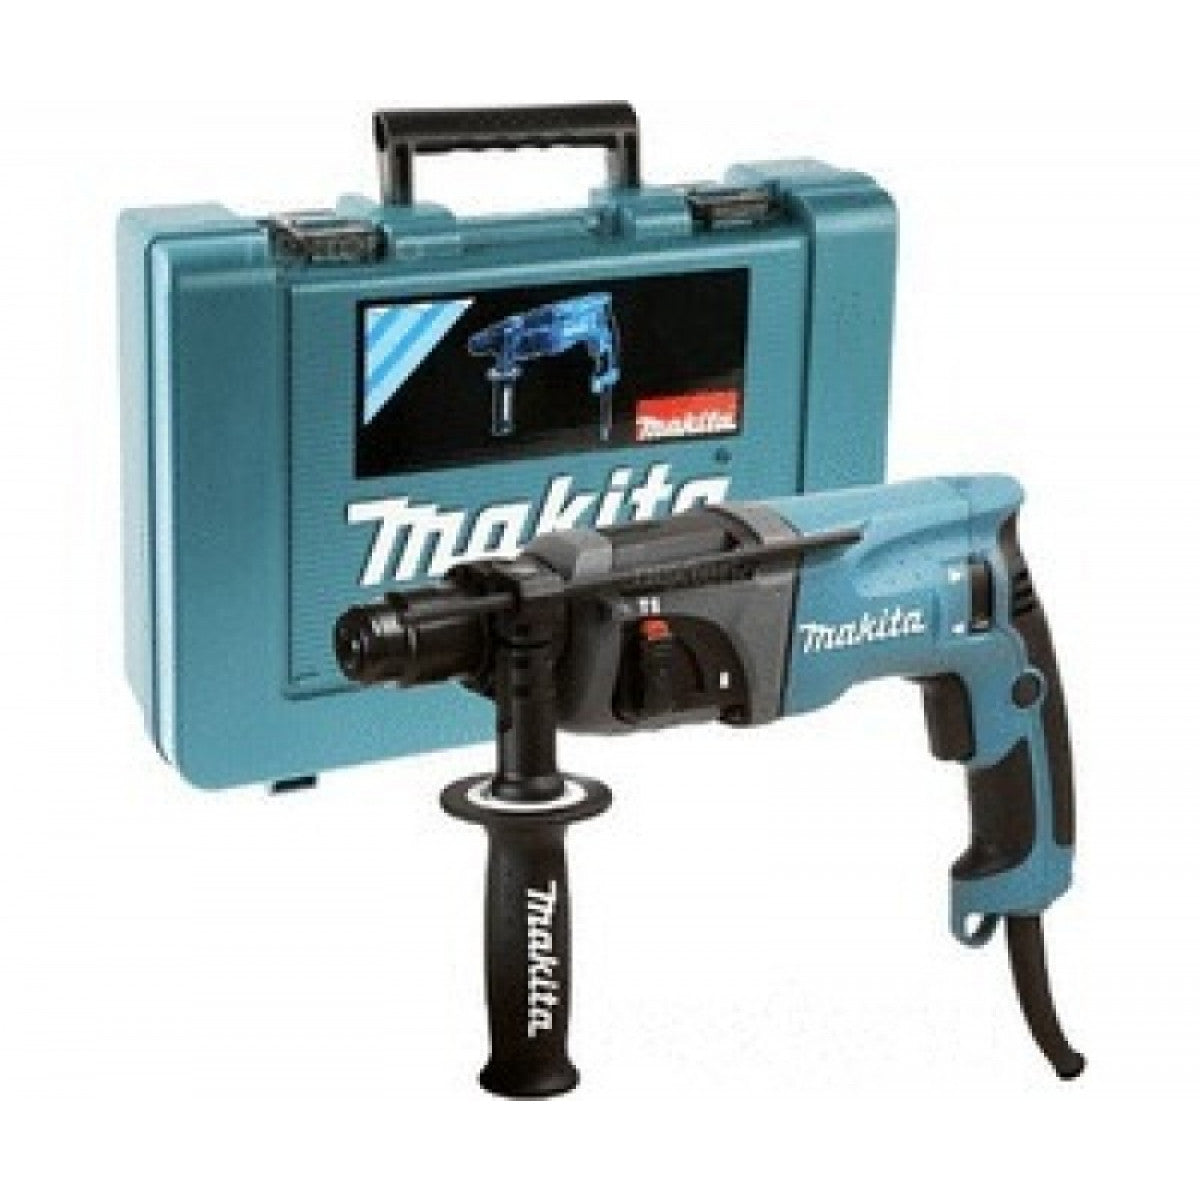 Makita Rotary Hammer HR2230 With Sds Plus Power Tool Services